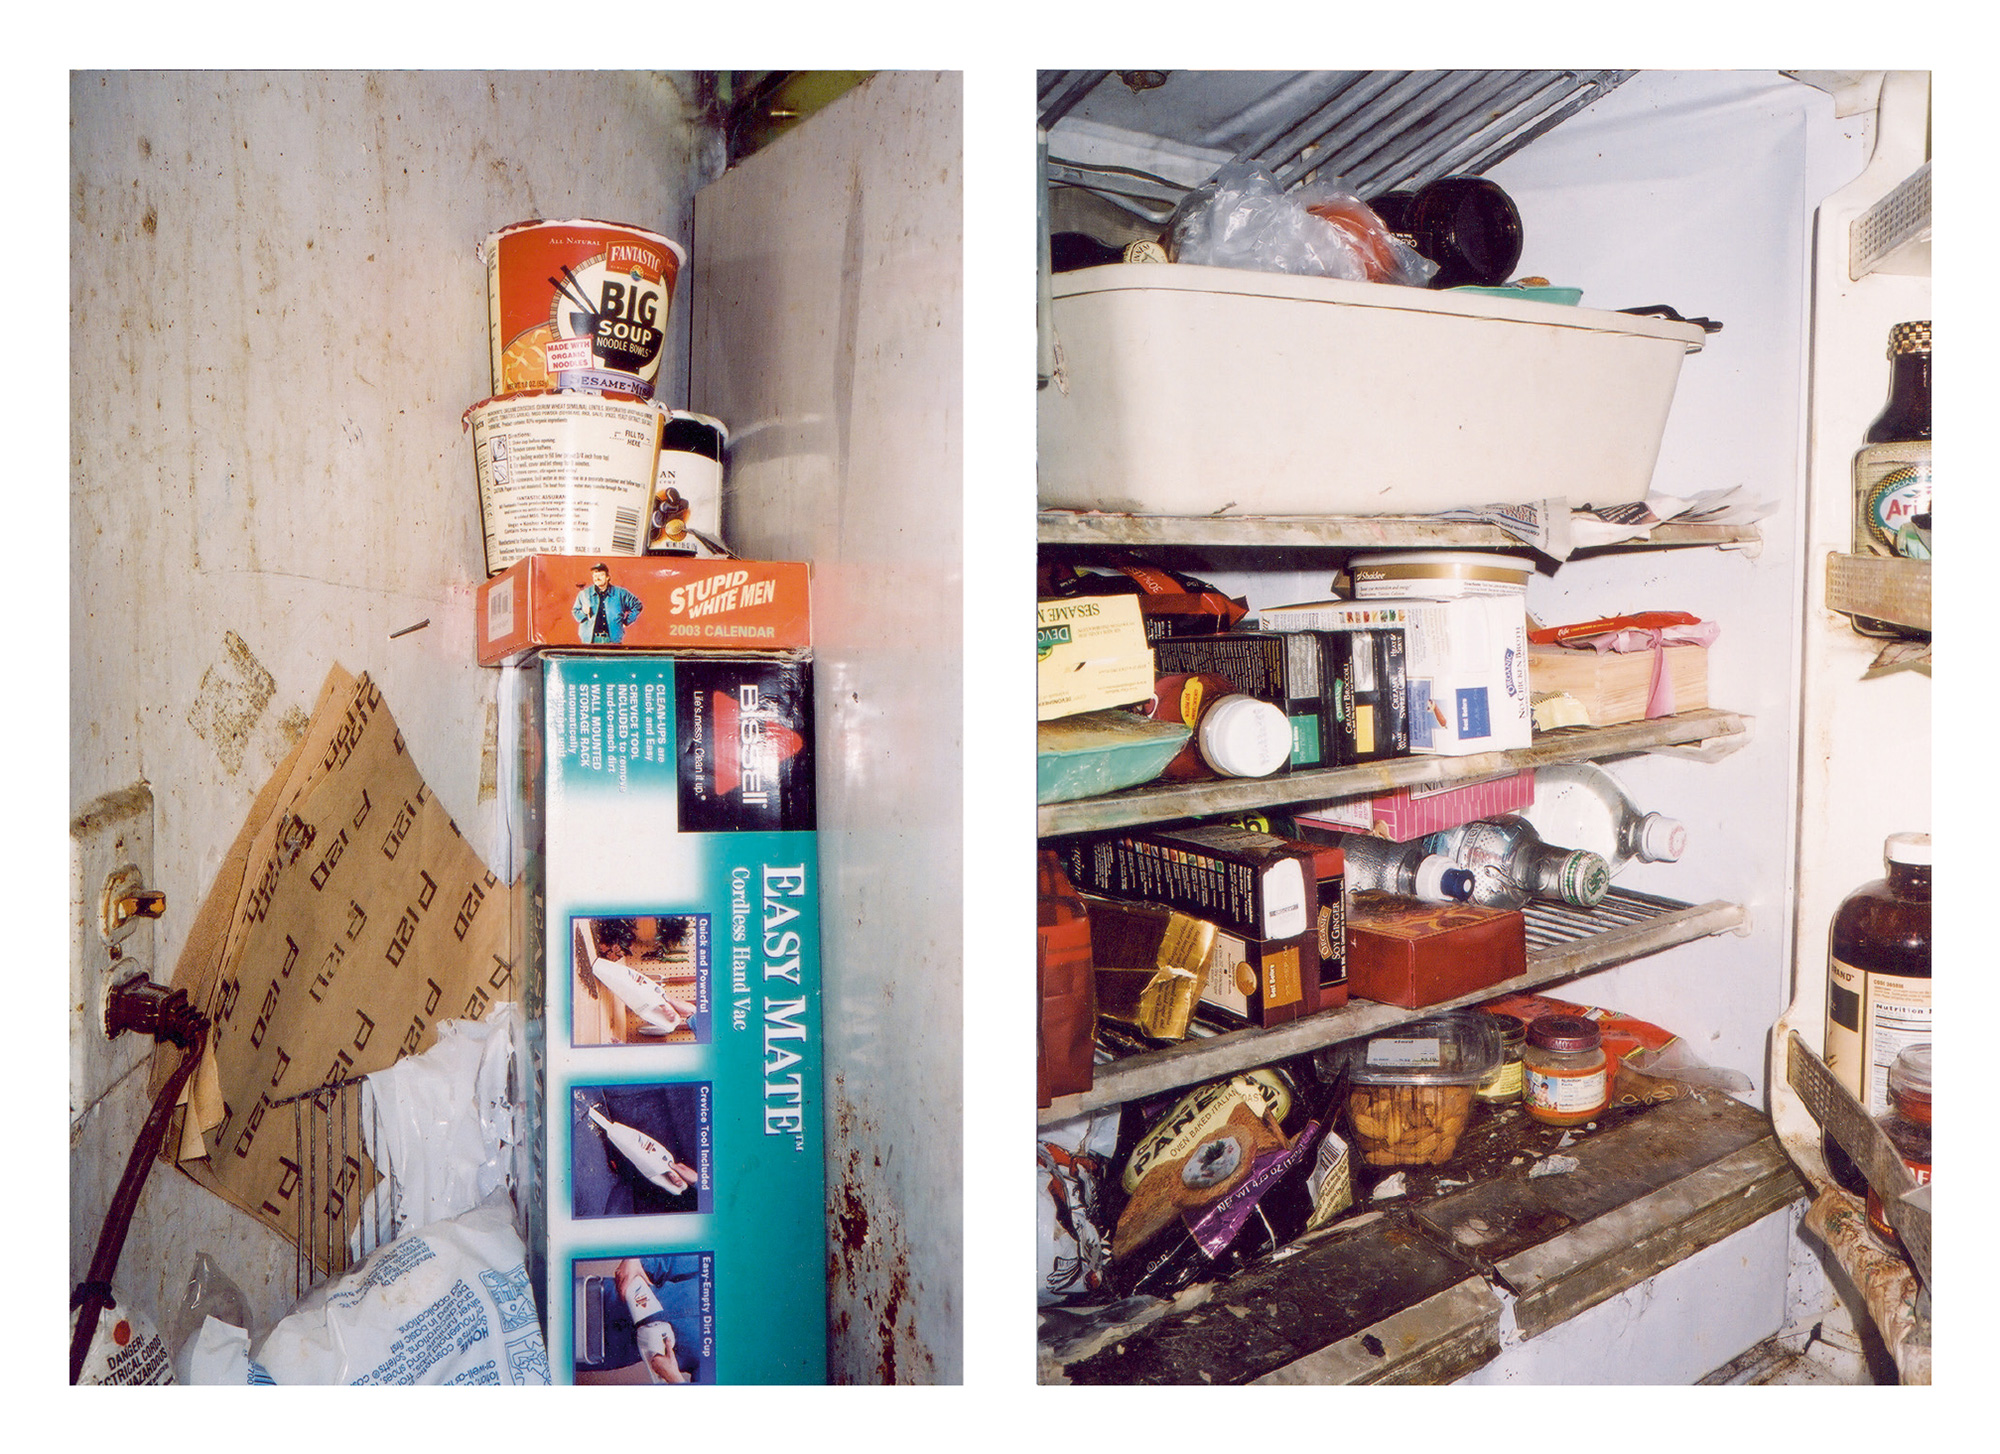 A photograph by Michael Schmelling of a disposophobic’s disorderly home. The photograph is featured in Schmelling’s book “The Plan.”